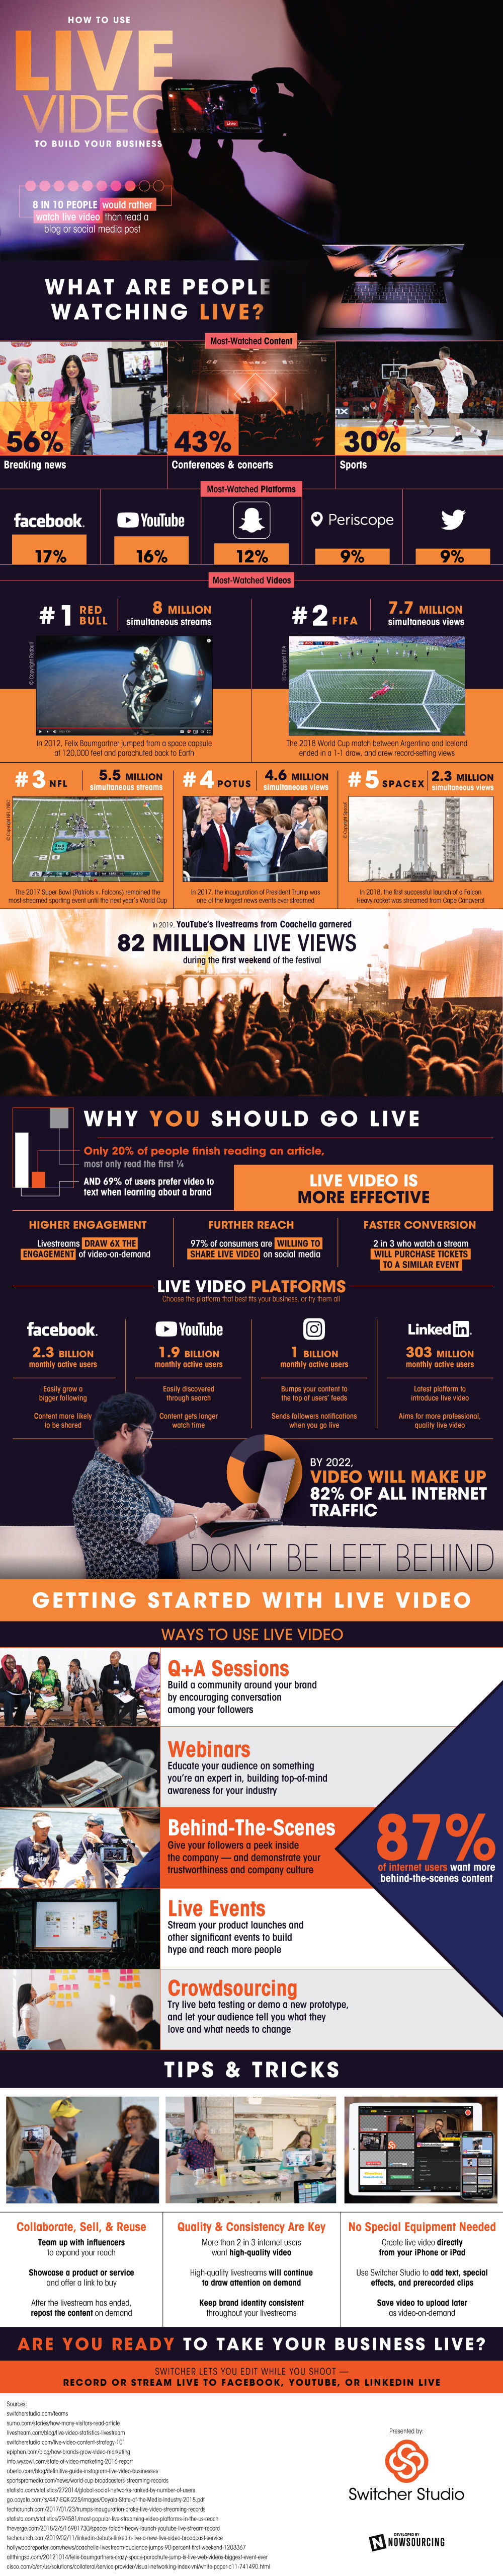 how-to-use-live-video